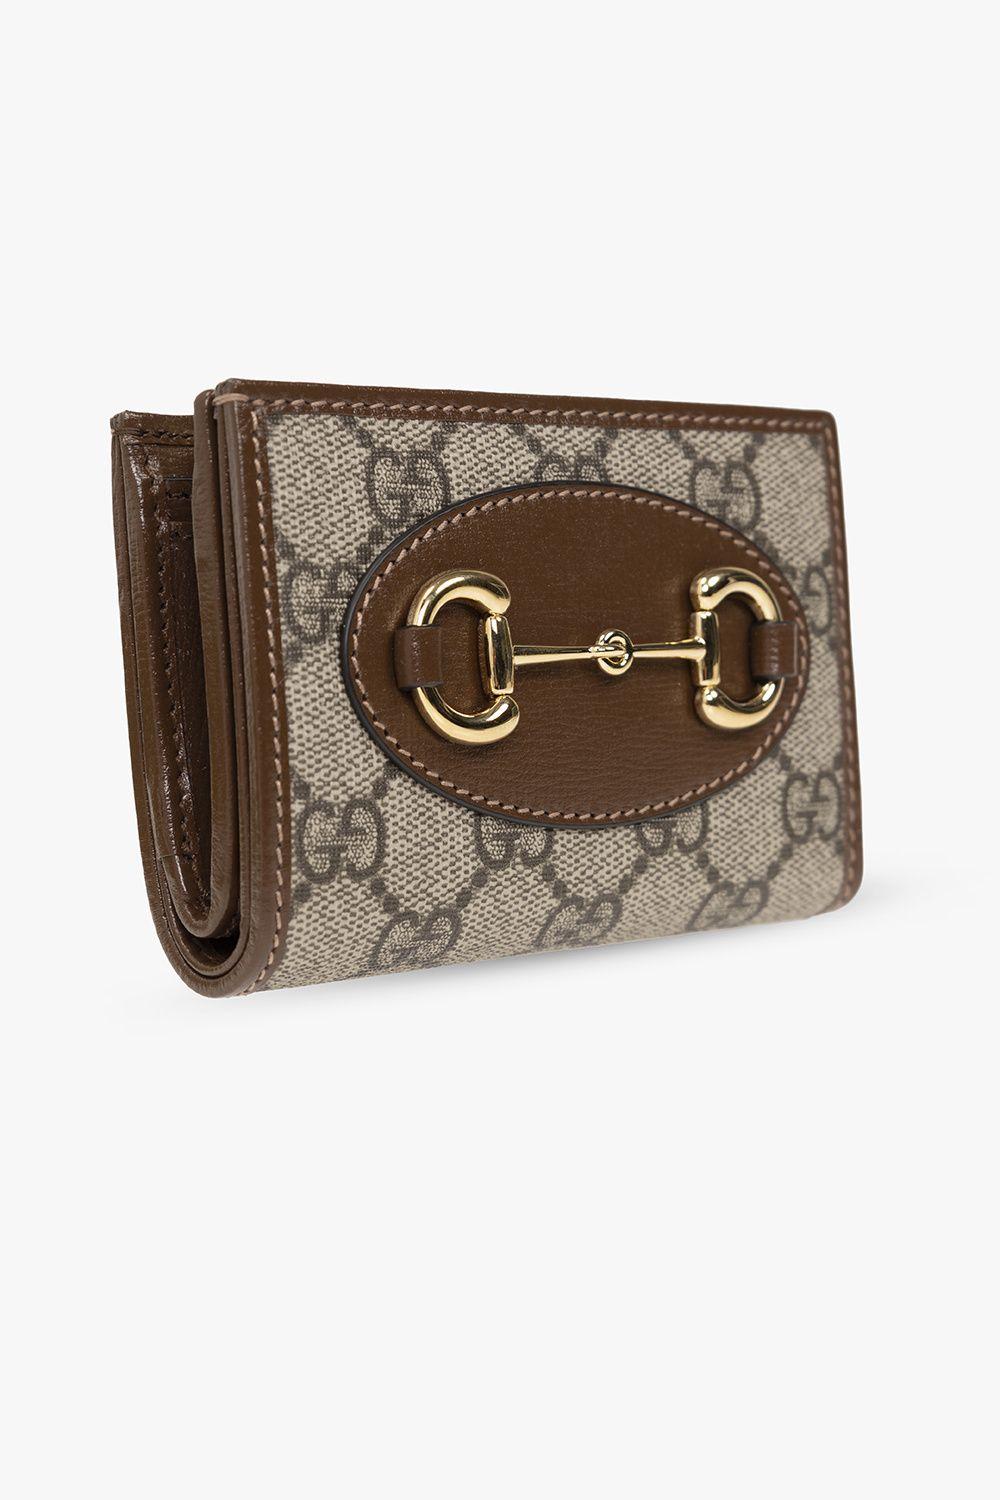 Gucci Horsebit 1955 Leather Wallet in Brown - Gucci